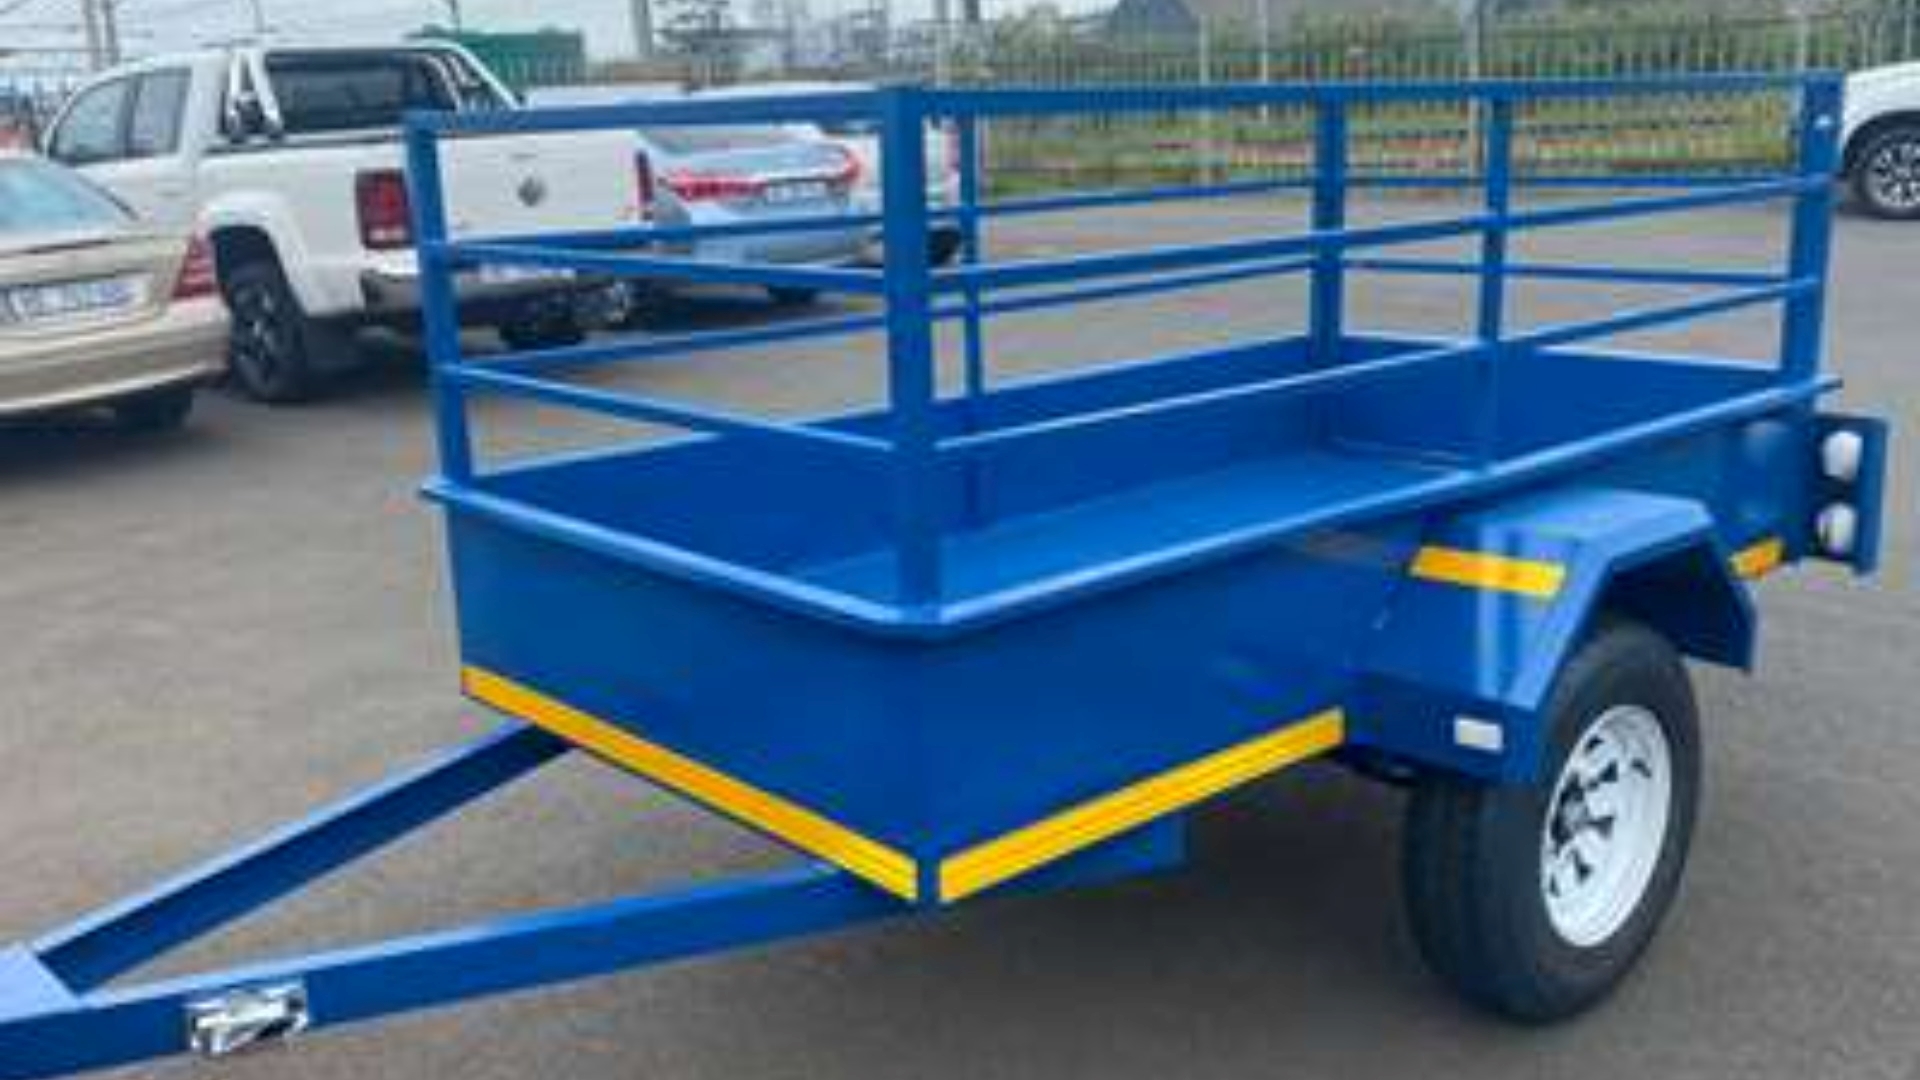 Custom Diesel bowser trailer UTILITY TRAILERS   VARIOUS SIZESAVAILABLE  He 2022 for sale by Jikelele Tankers and Trailers   | Truck & Trailer Marketplaces